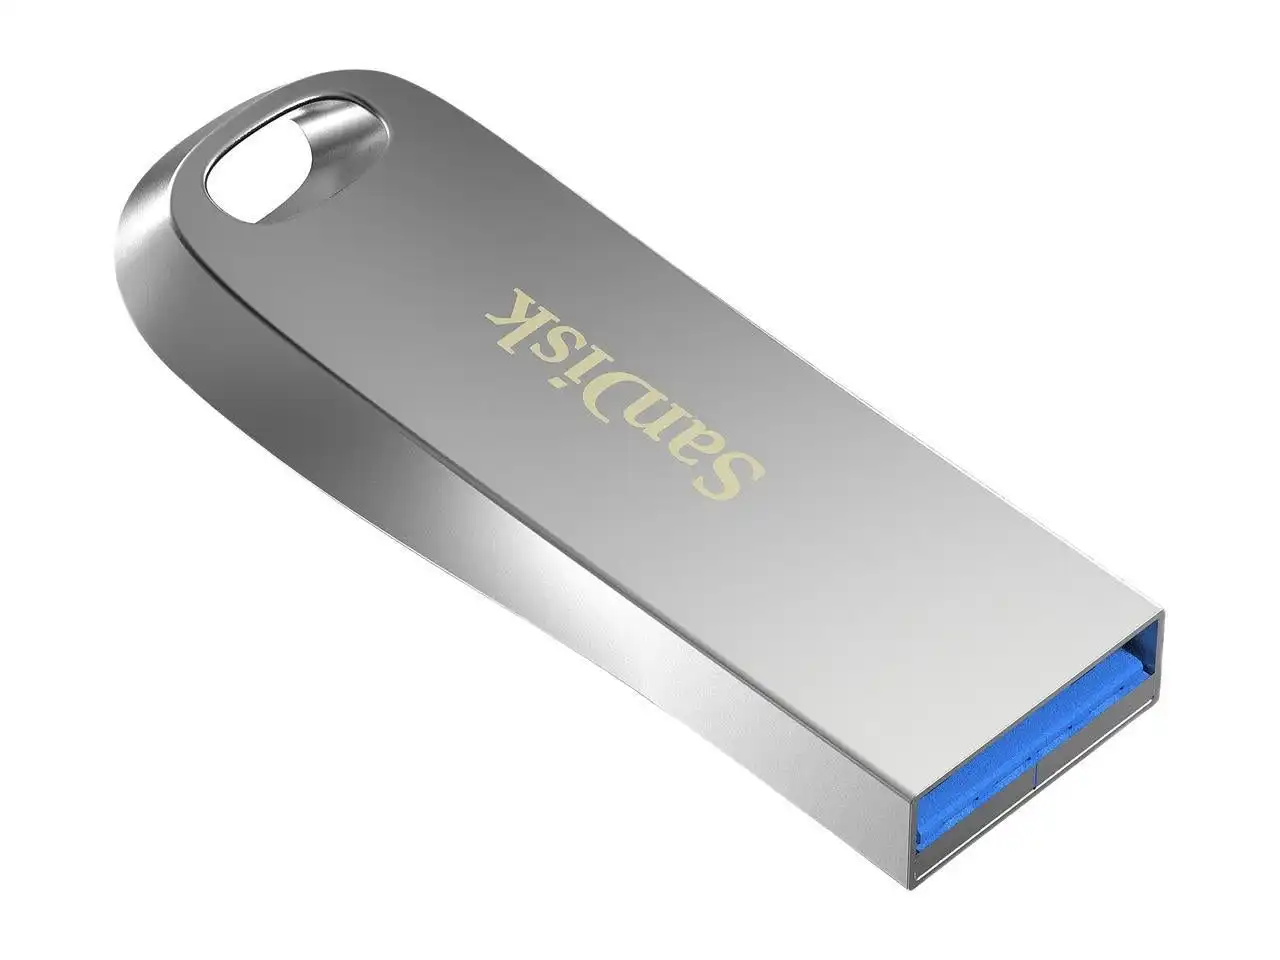 Sandisk Sdcz74 032g G46 32g  Ultra Luxe Pen Drive 150mb Usb 3.0 Metal